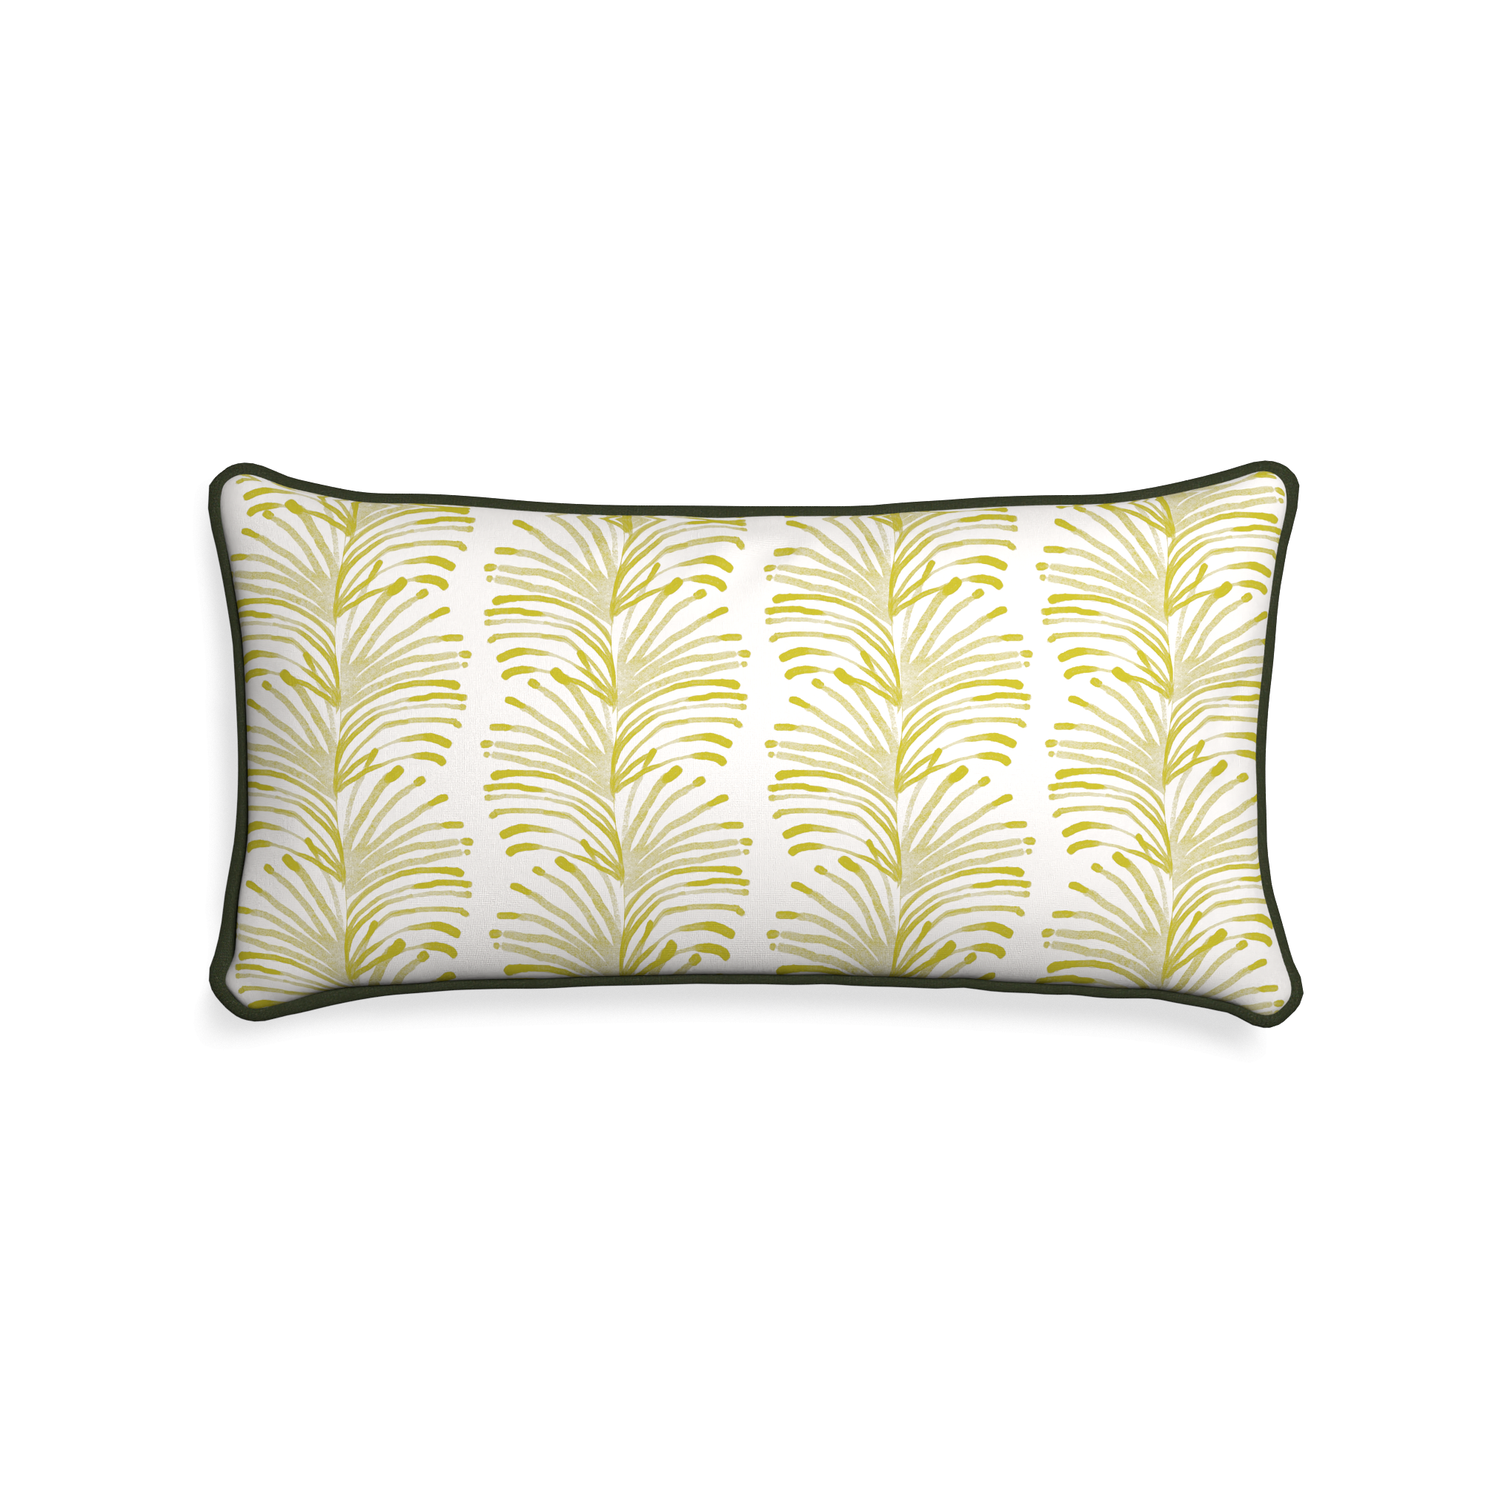 Midi-lumbar emma chartreuse custom yellow stripe chartreusepillow with f piping on white background